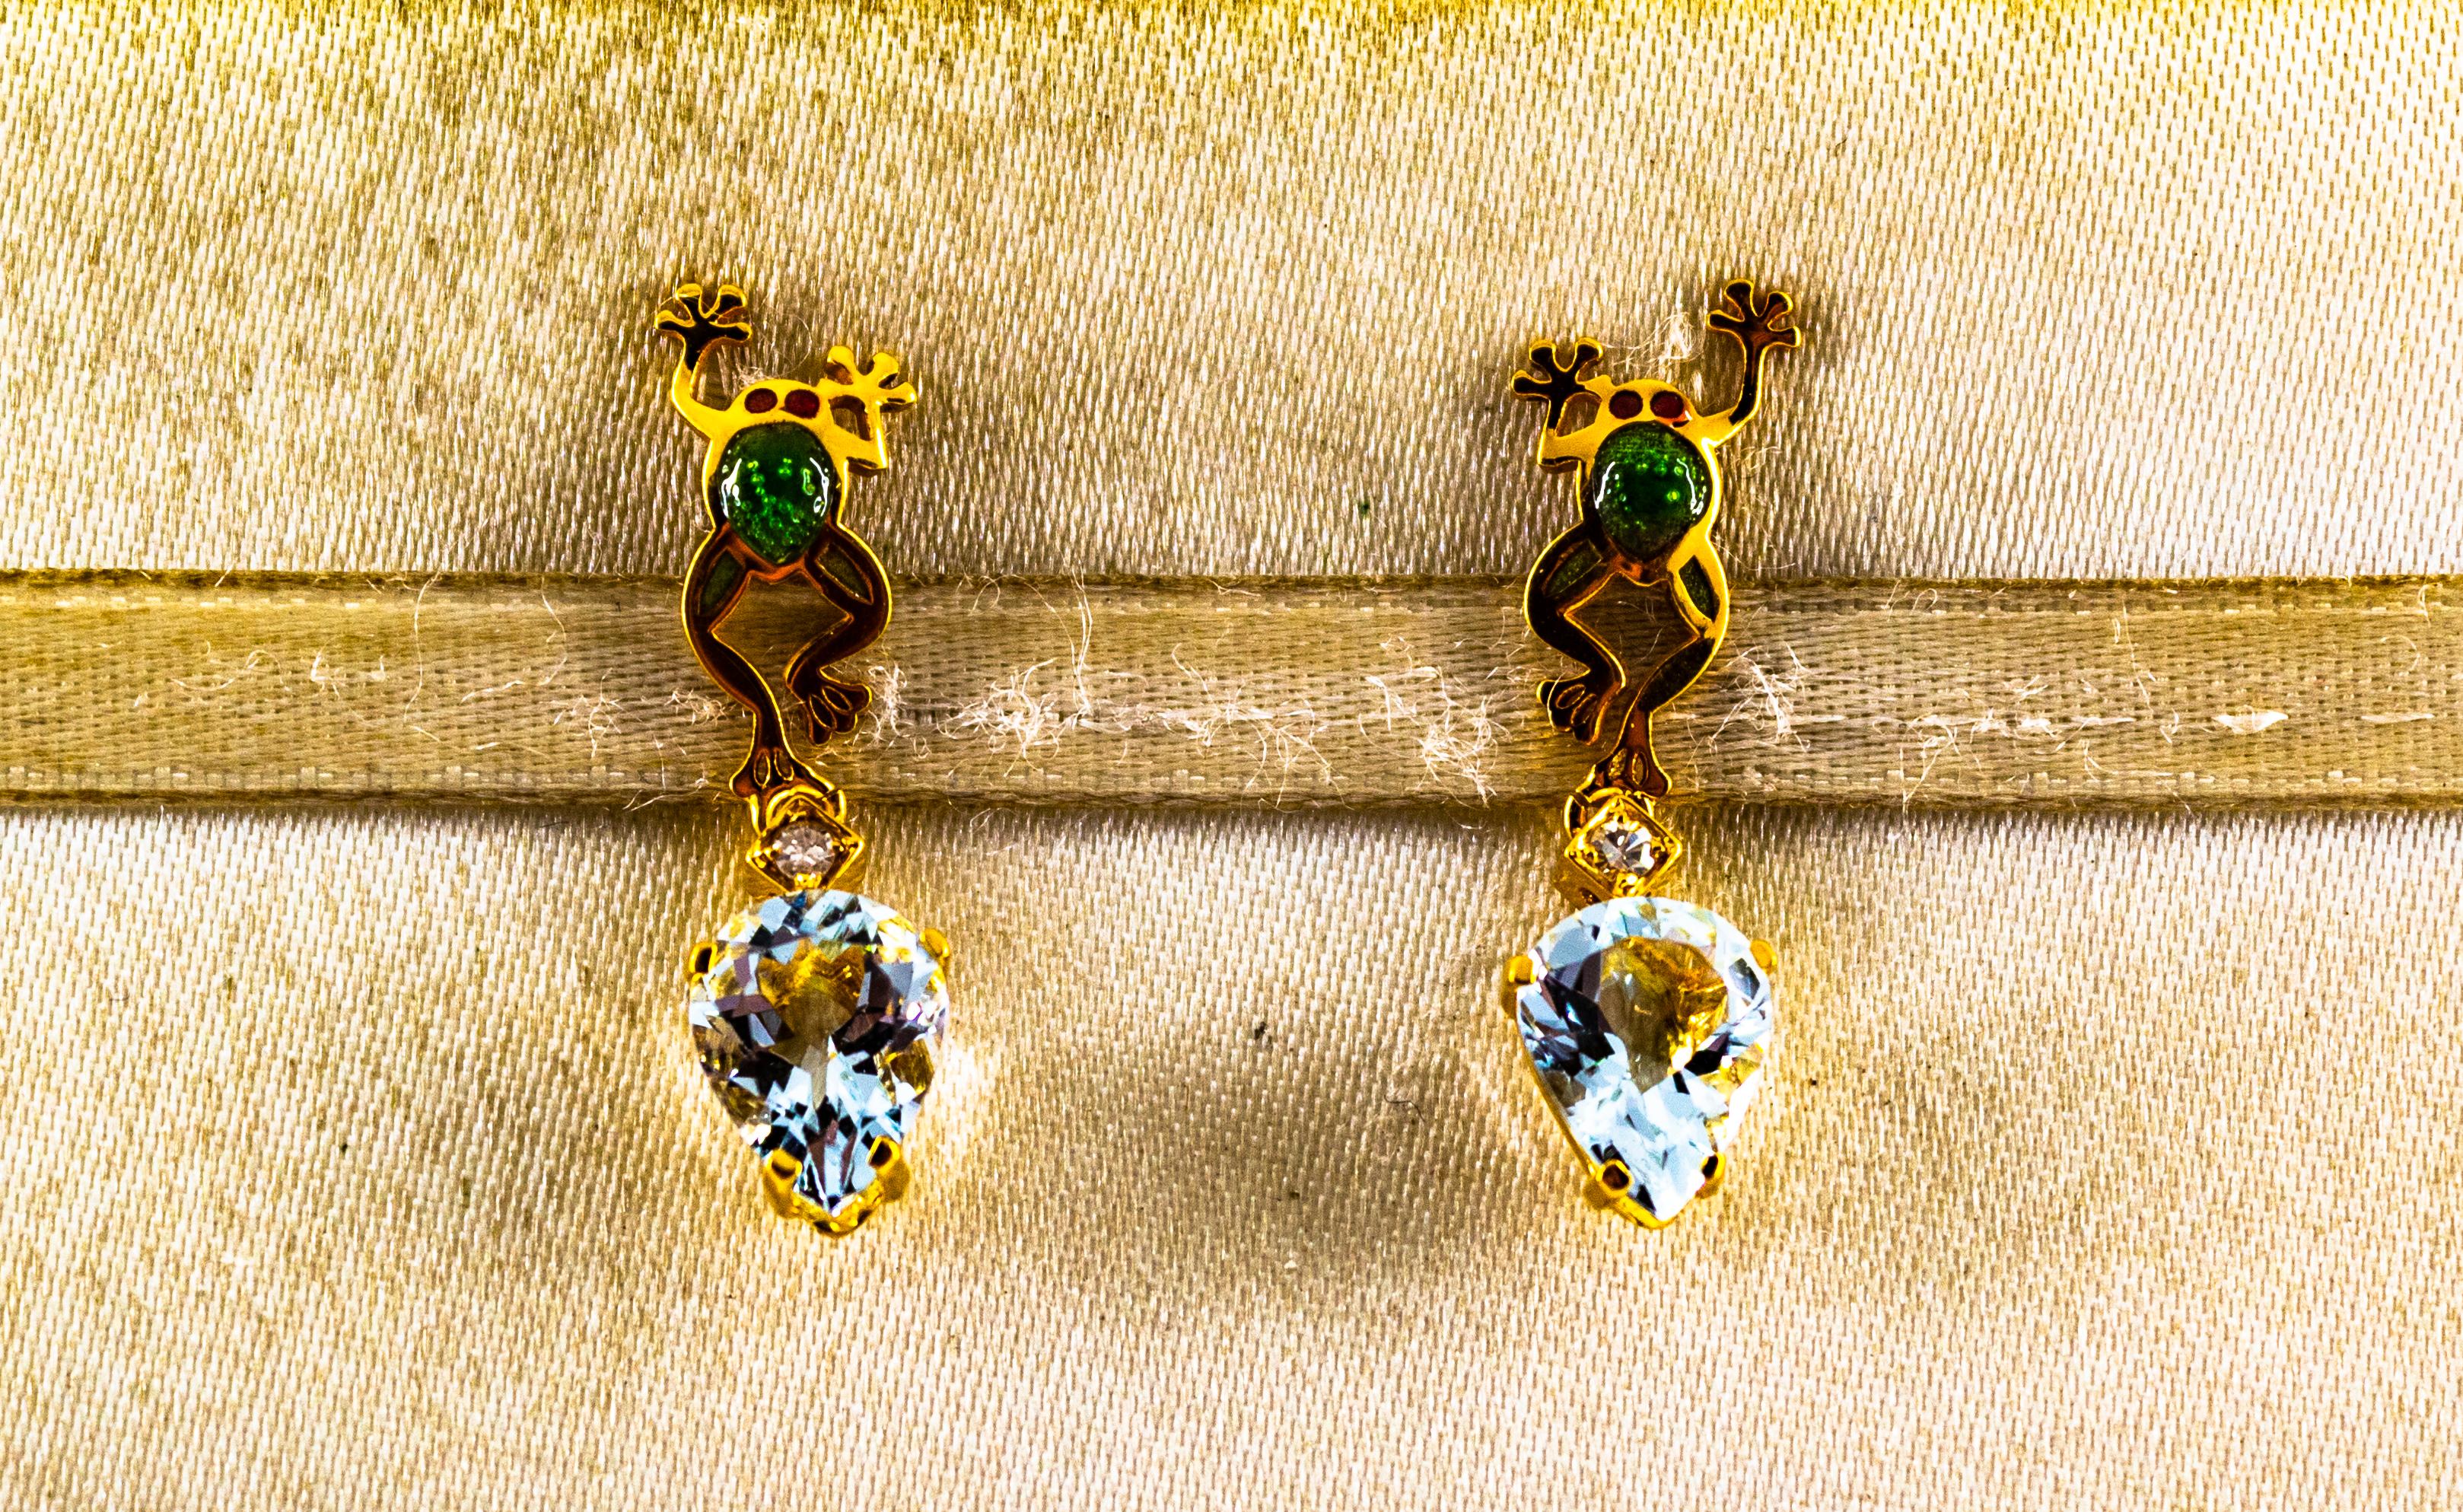 These Stud Earrings are made of 9K Yellow Gold.
These Earrings have 0.06 Carats of White Brilliant Cut Diamonds.
These Earrings have 2.80 Carats of Aquamarine.
These Earrings have Green Enamel.

These Earrings are available also in 9K, 14K or 18K